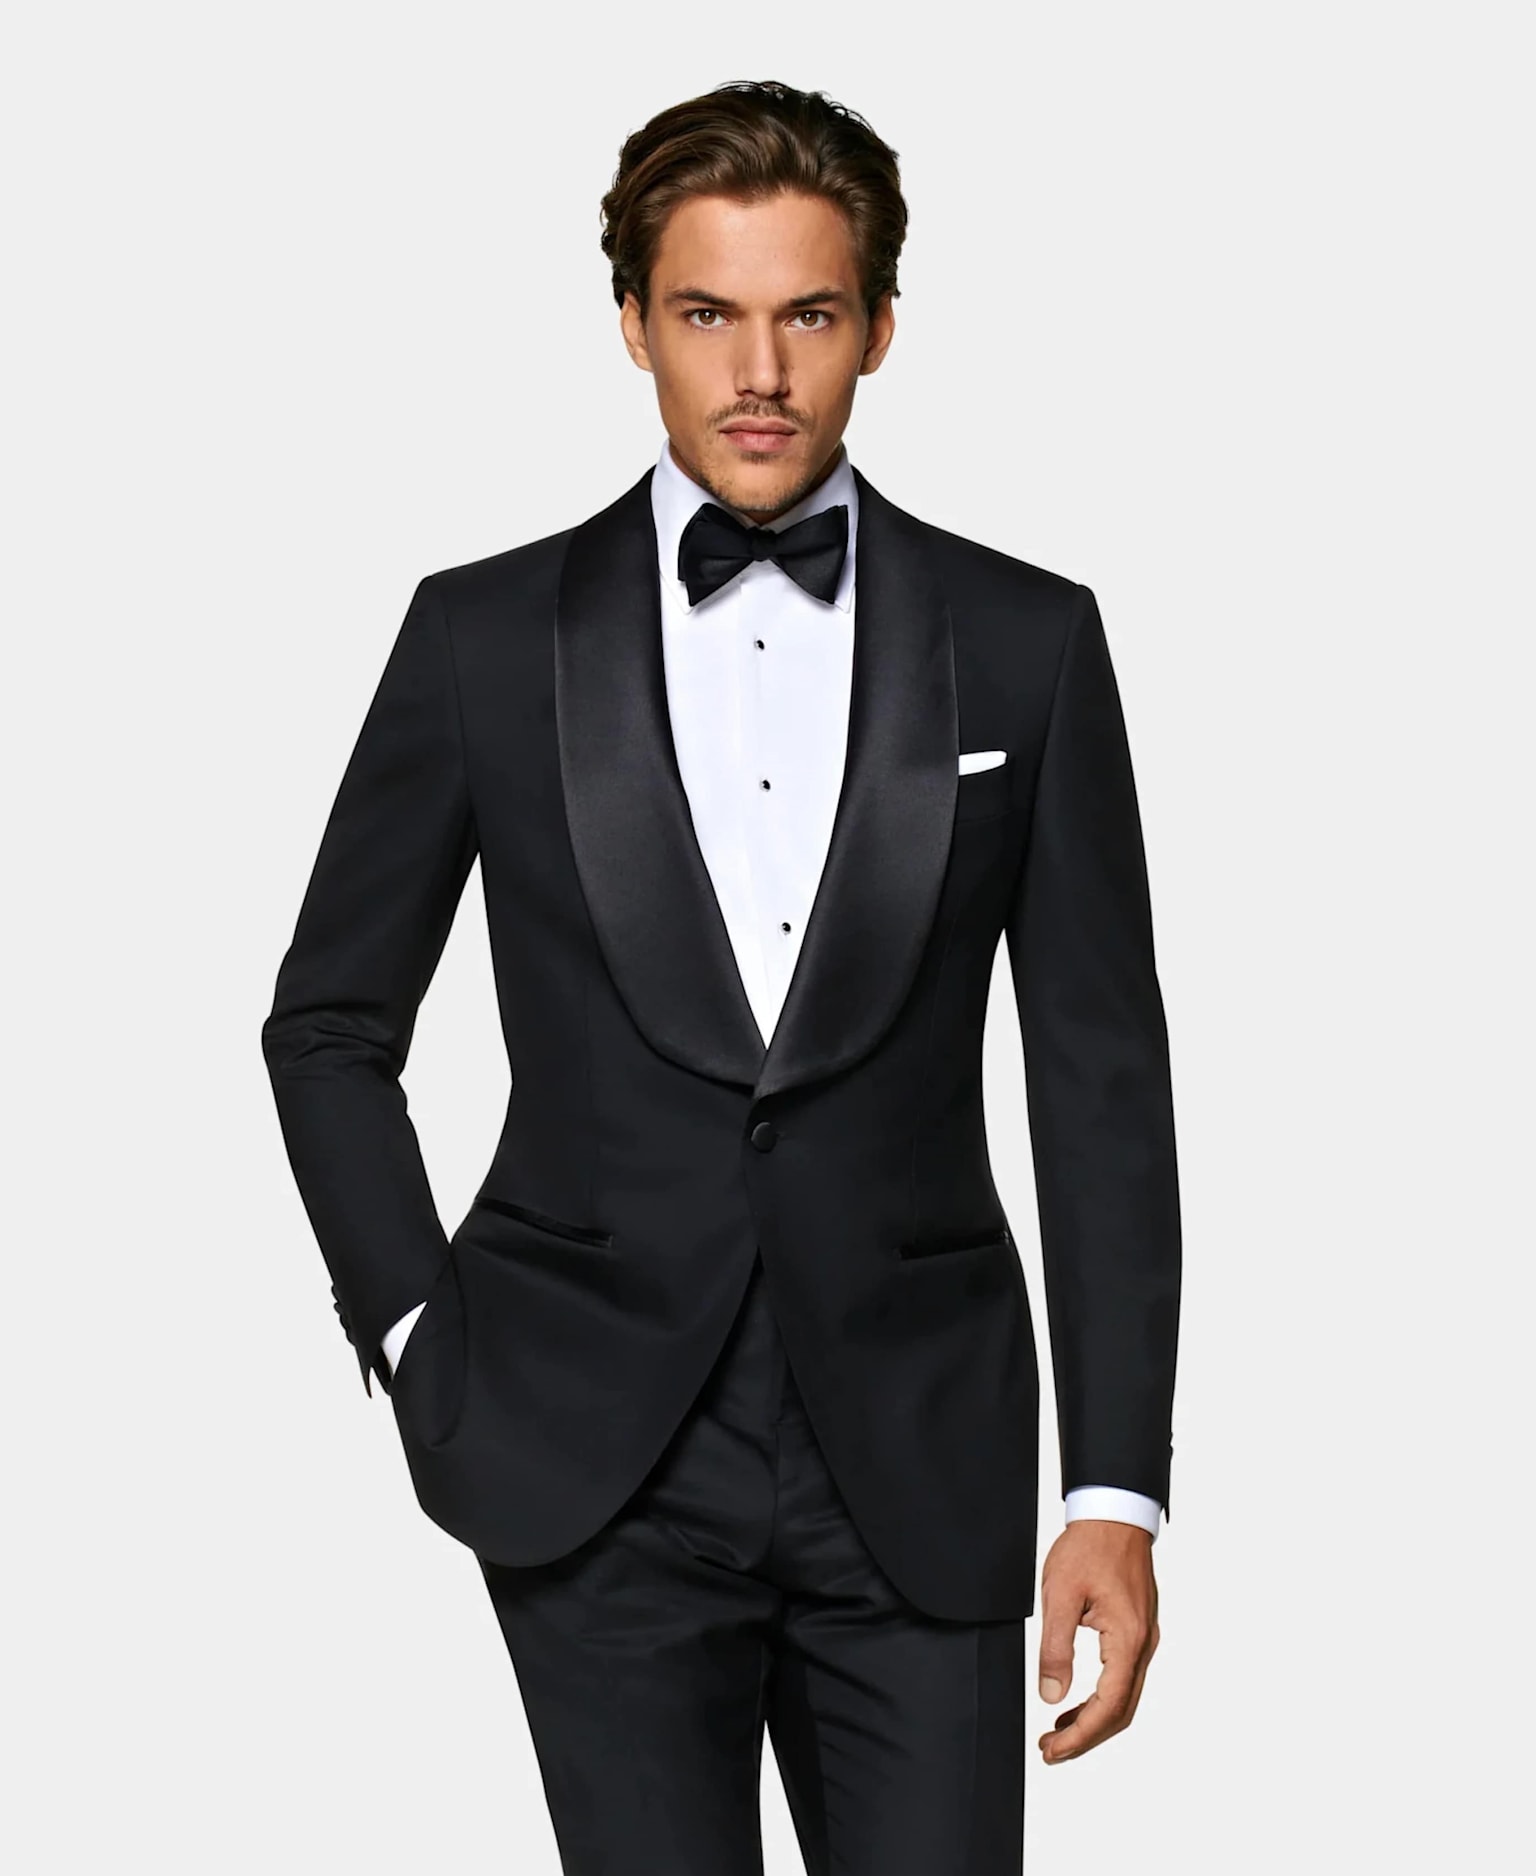 Black tie dress code decoded | SUITSUPPLY